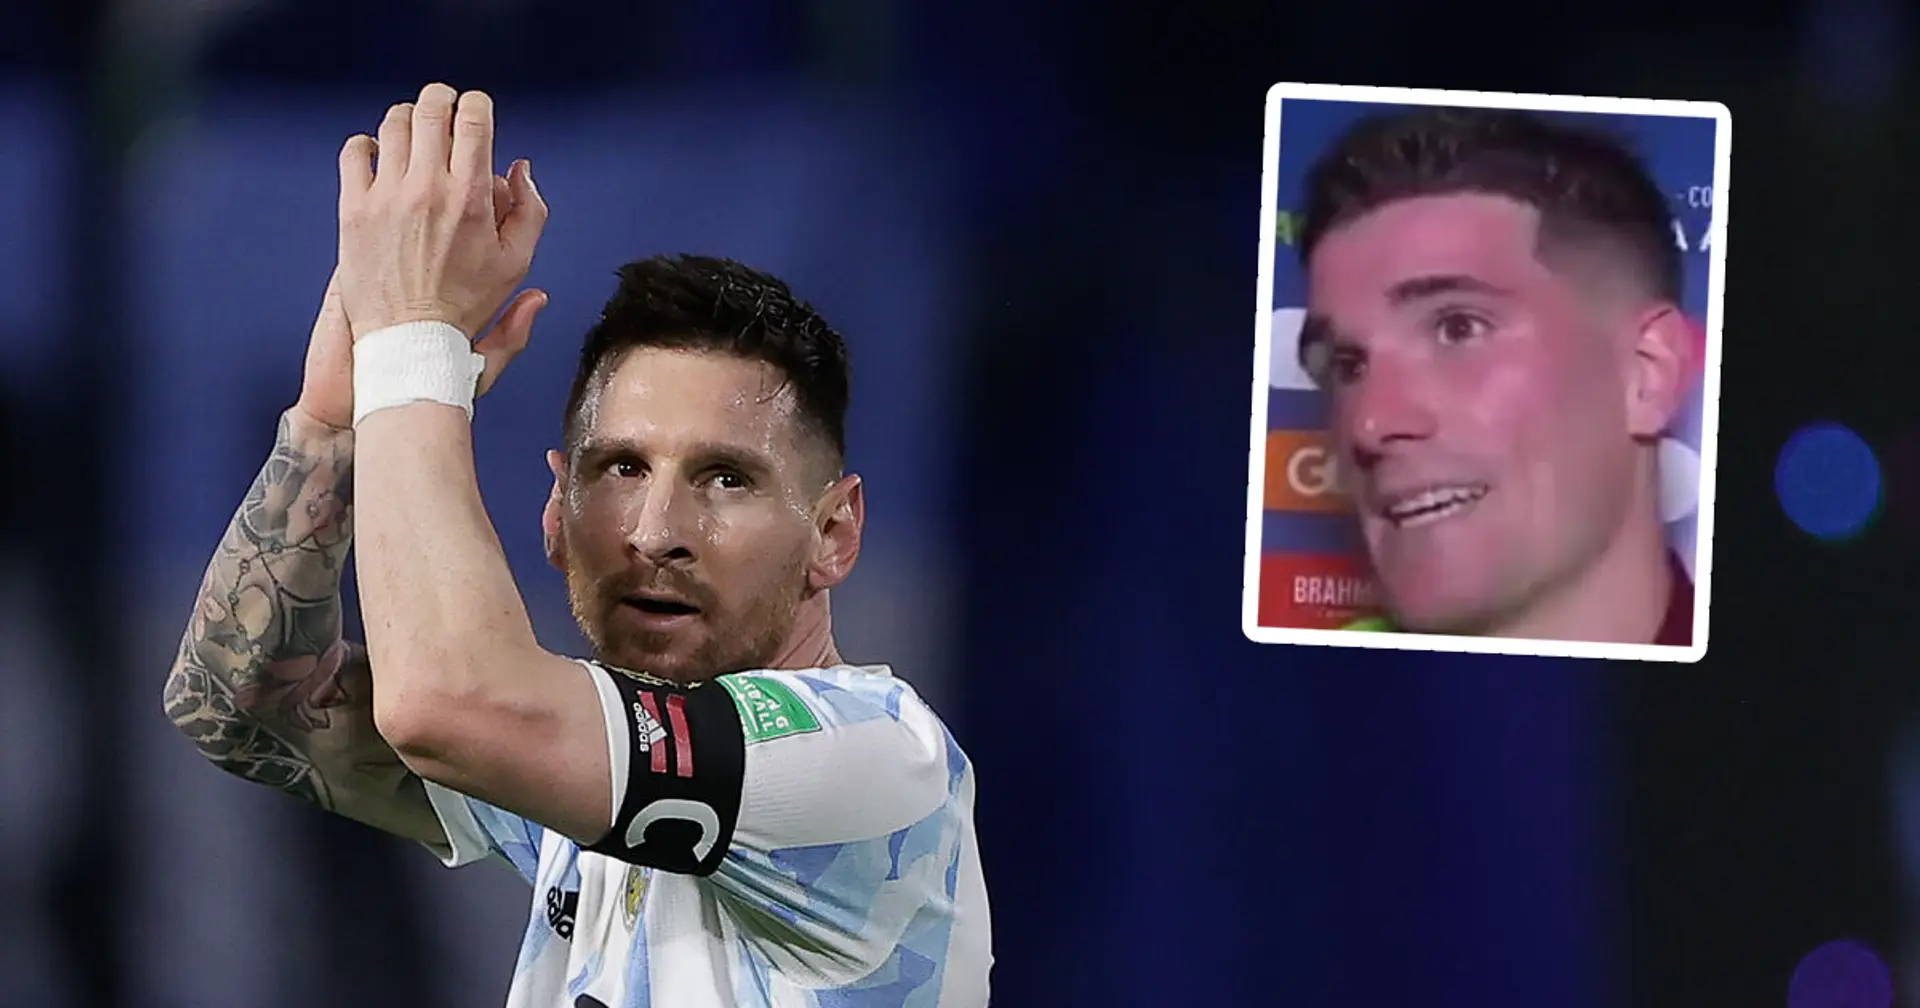 Atleti's De Paul names one thing Messi is better at 'than any other human being'